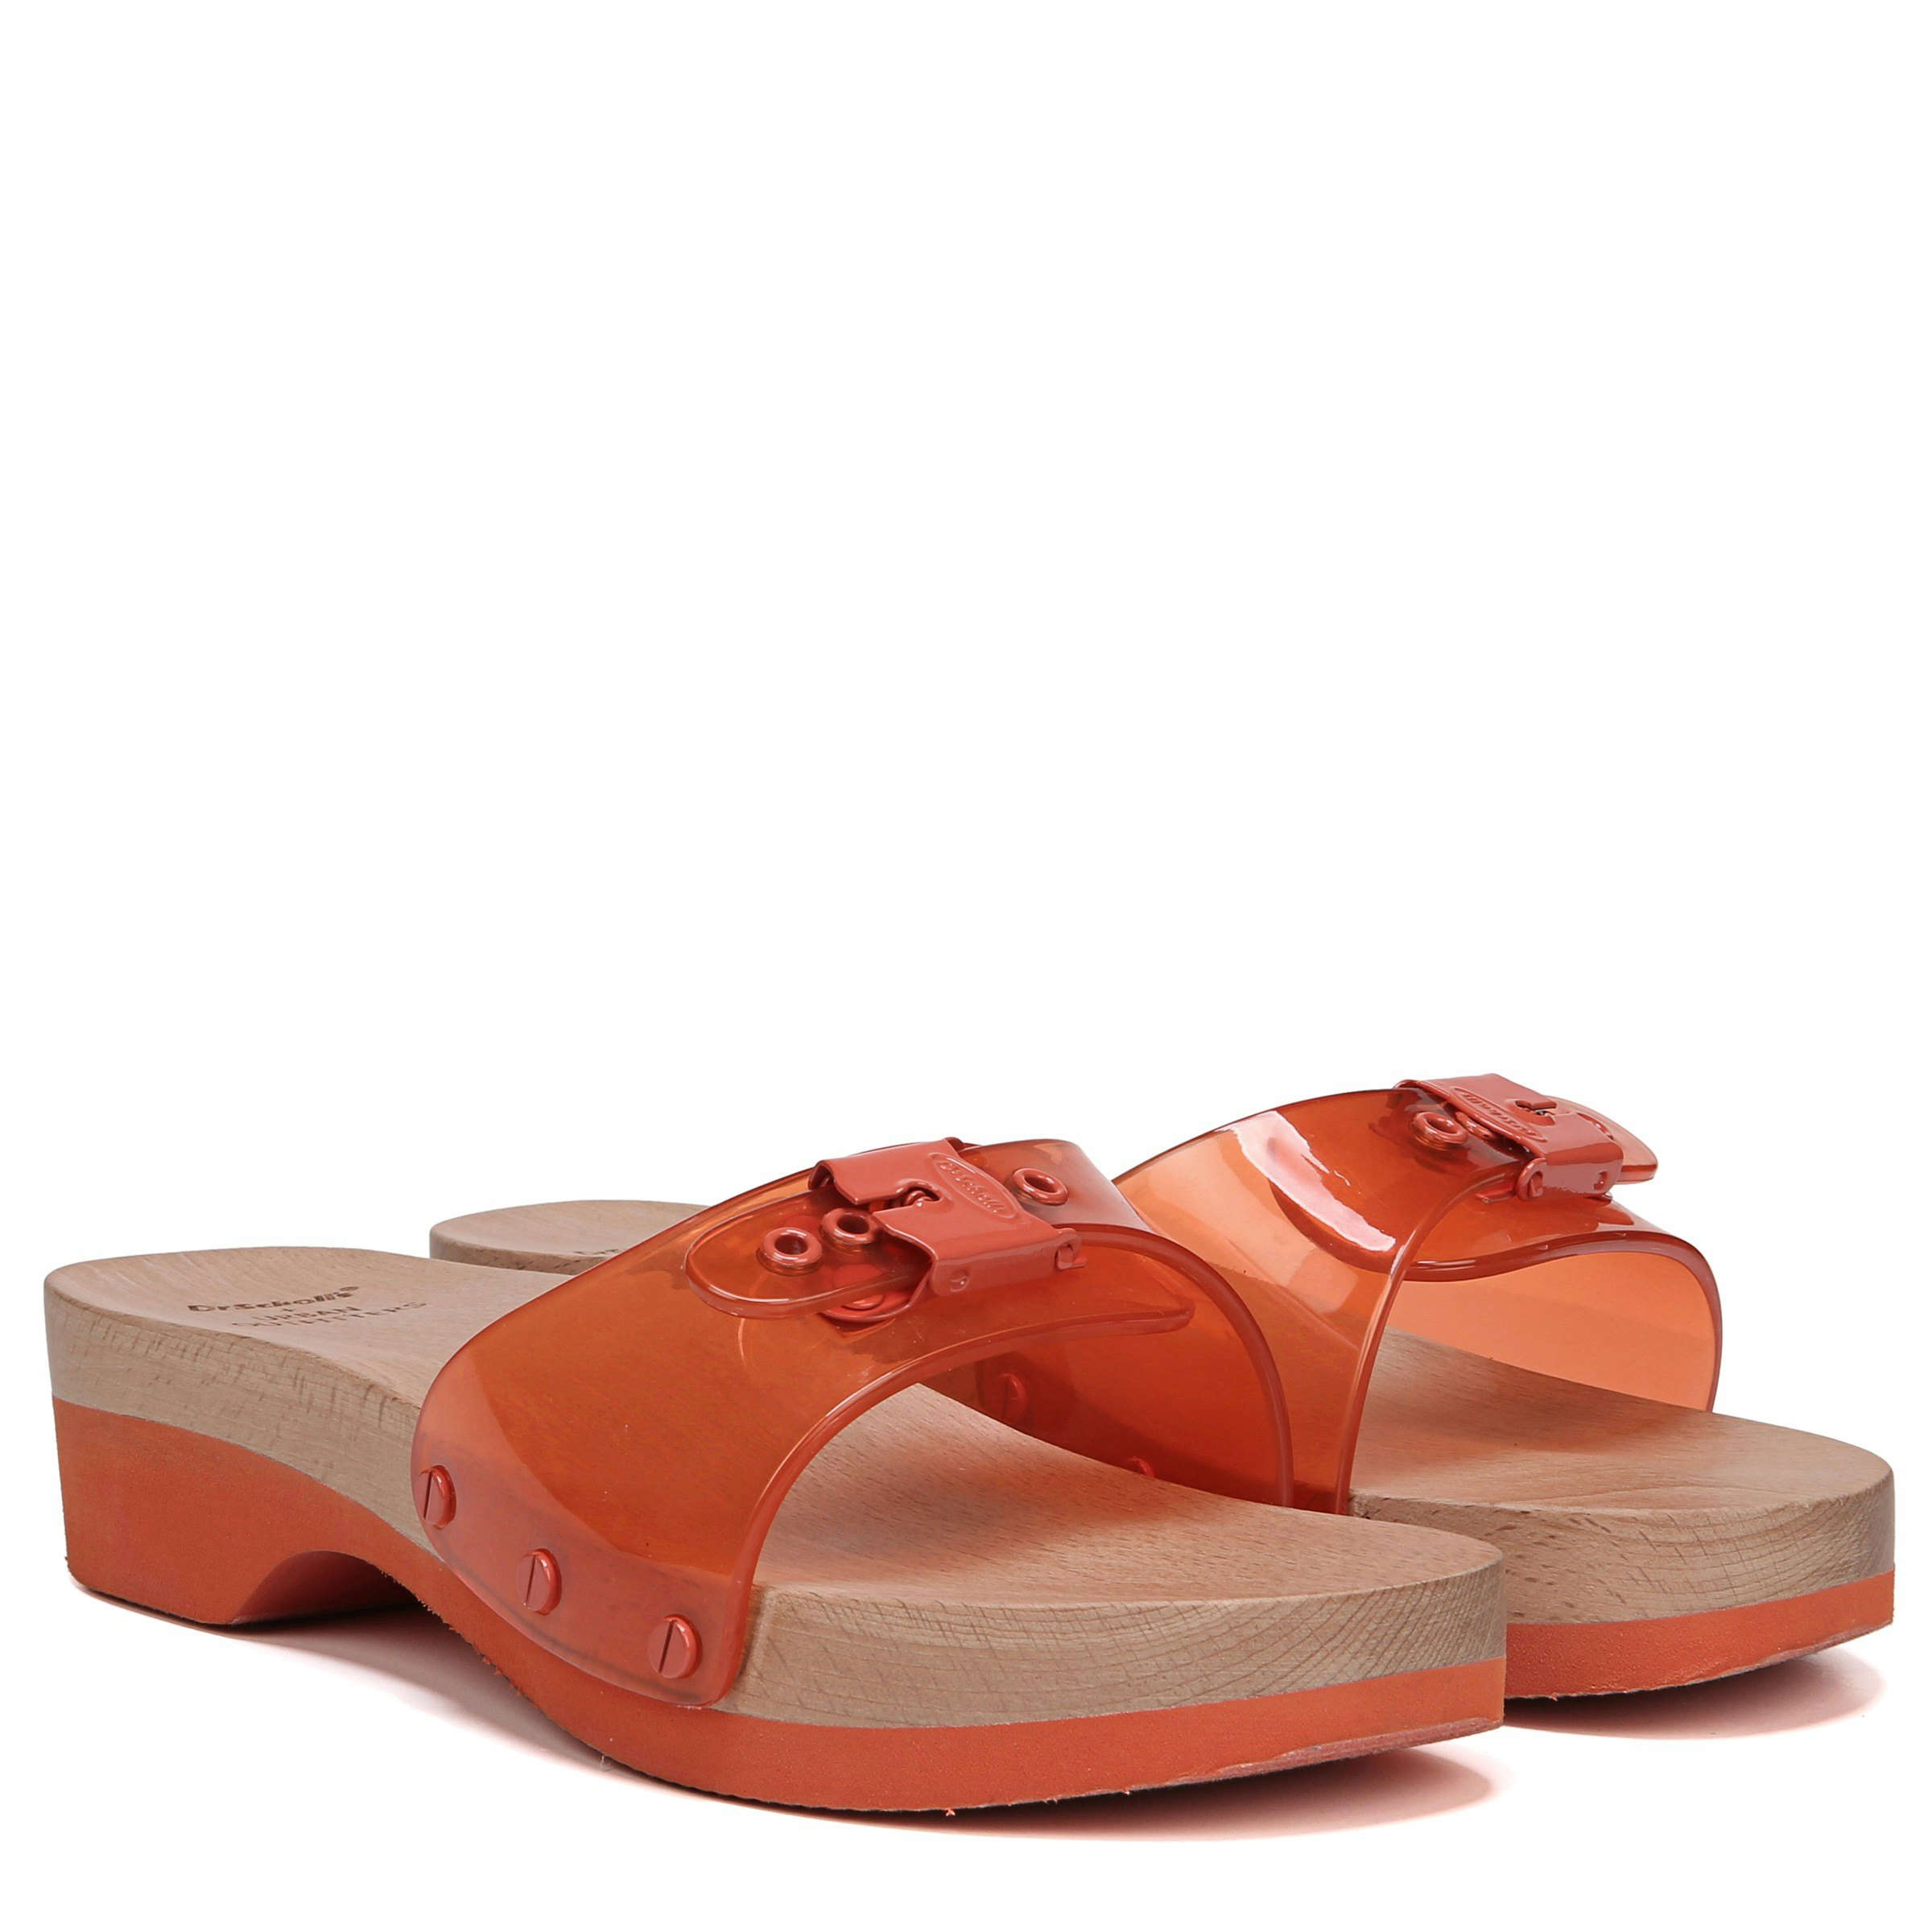 urban outfitters dr scholls